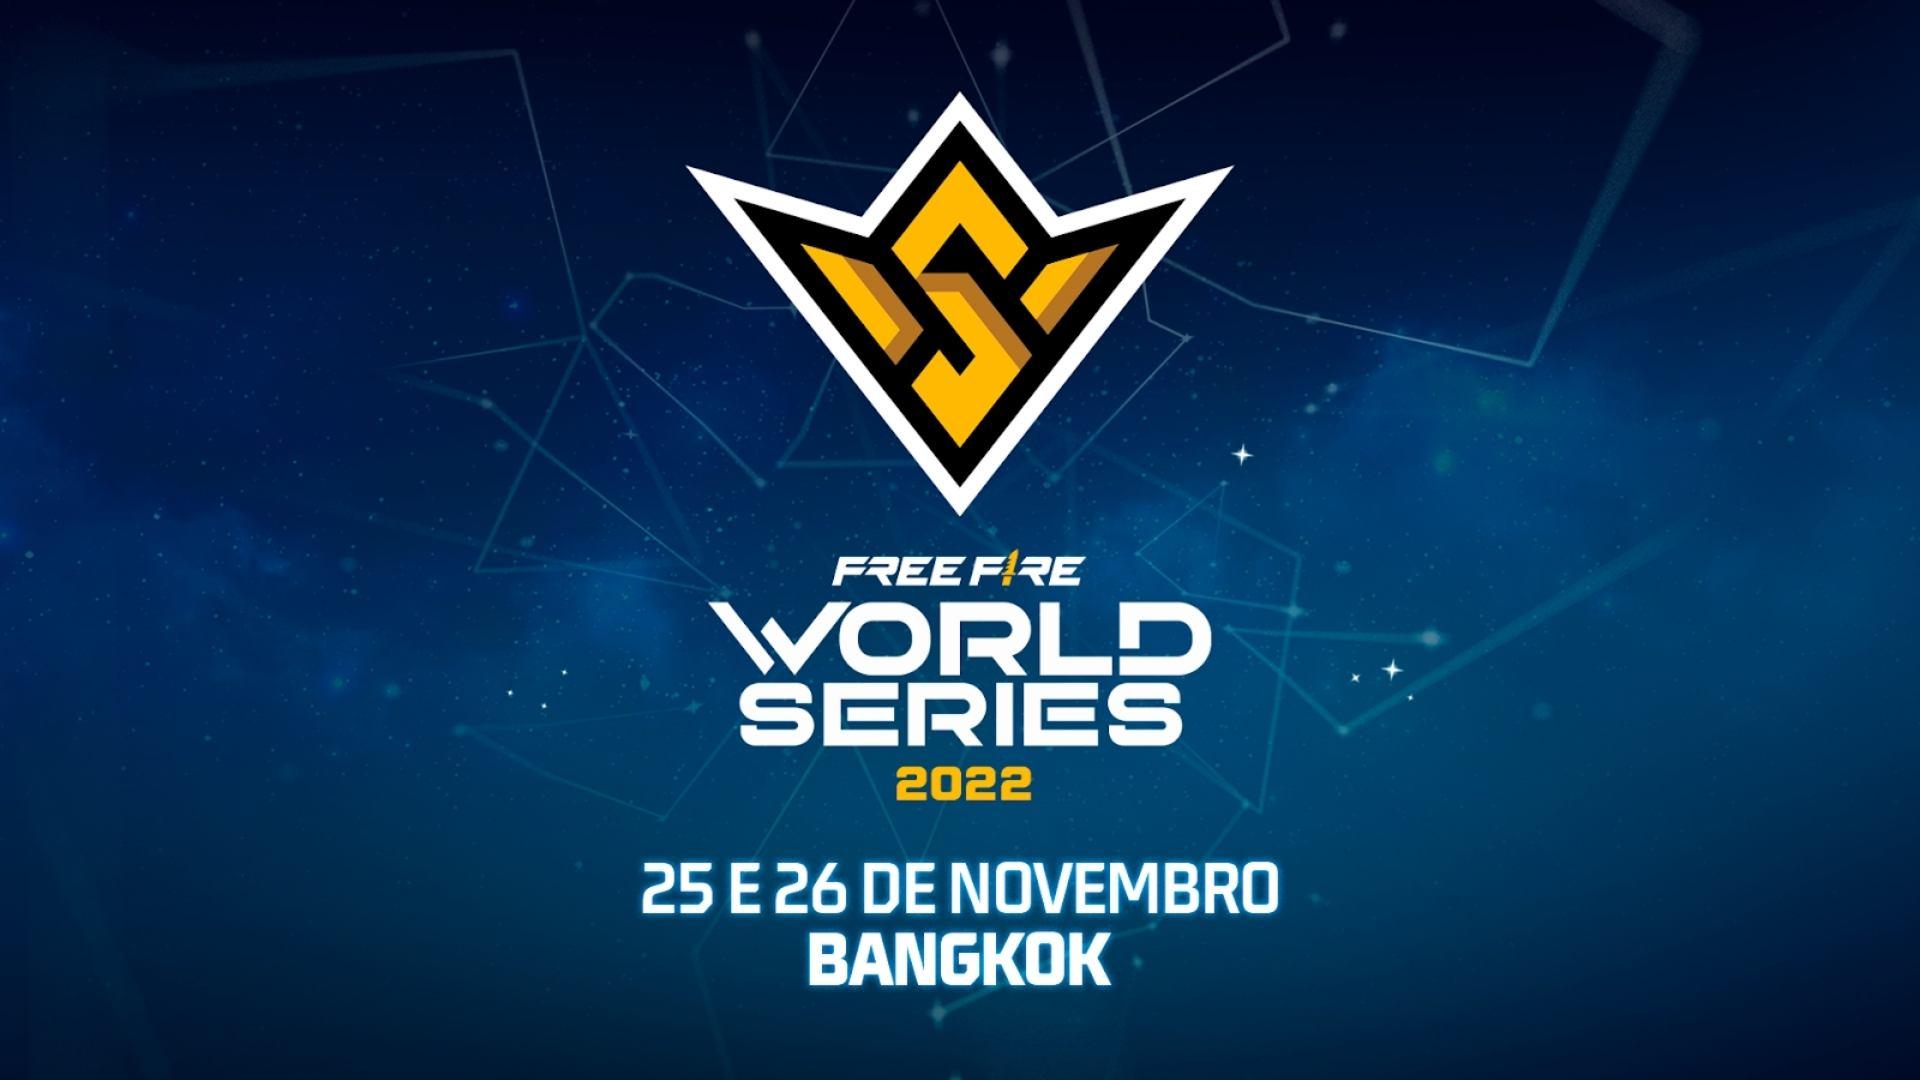 FF Mundial: Free Fire World Series 2022 will take place in November, in Thailand